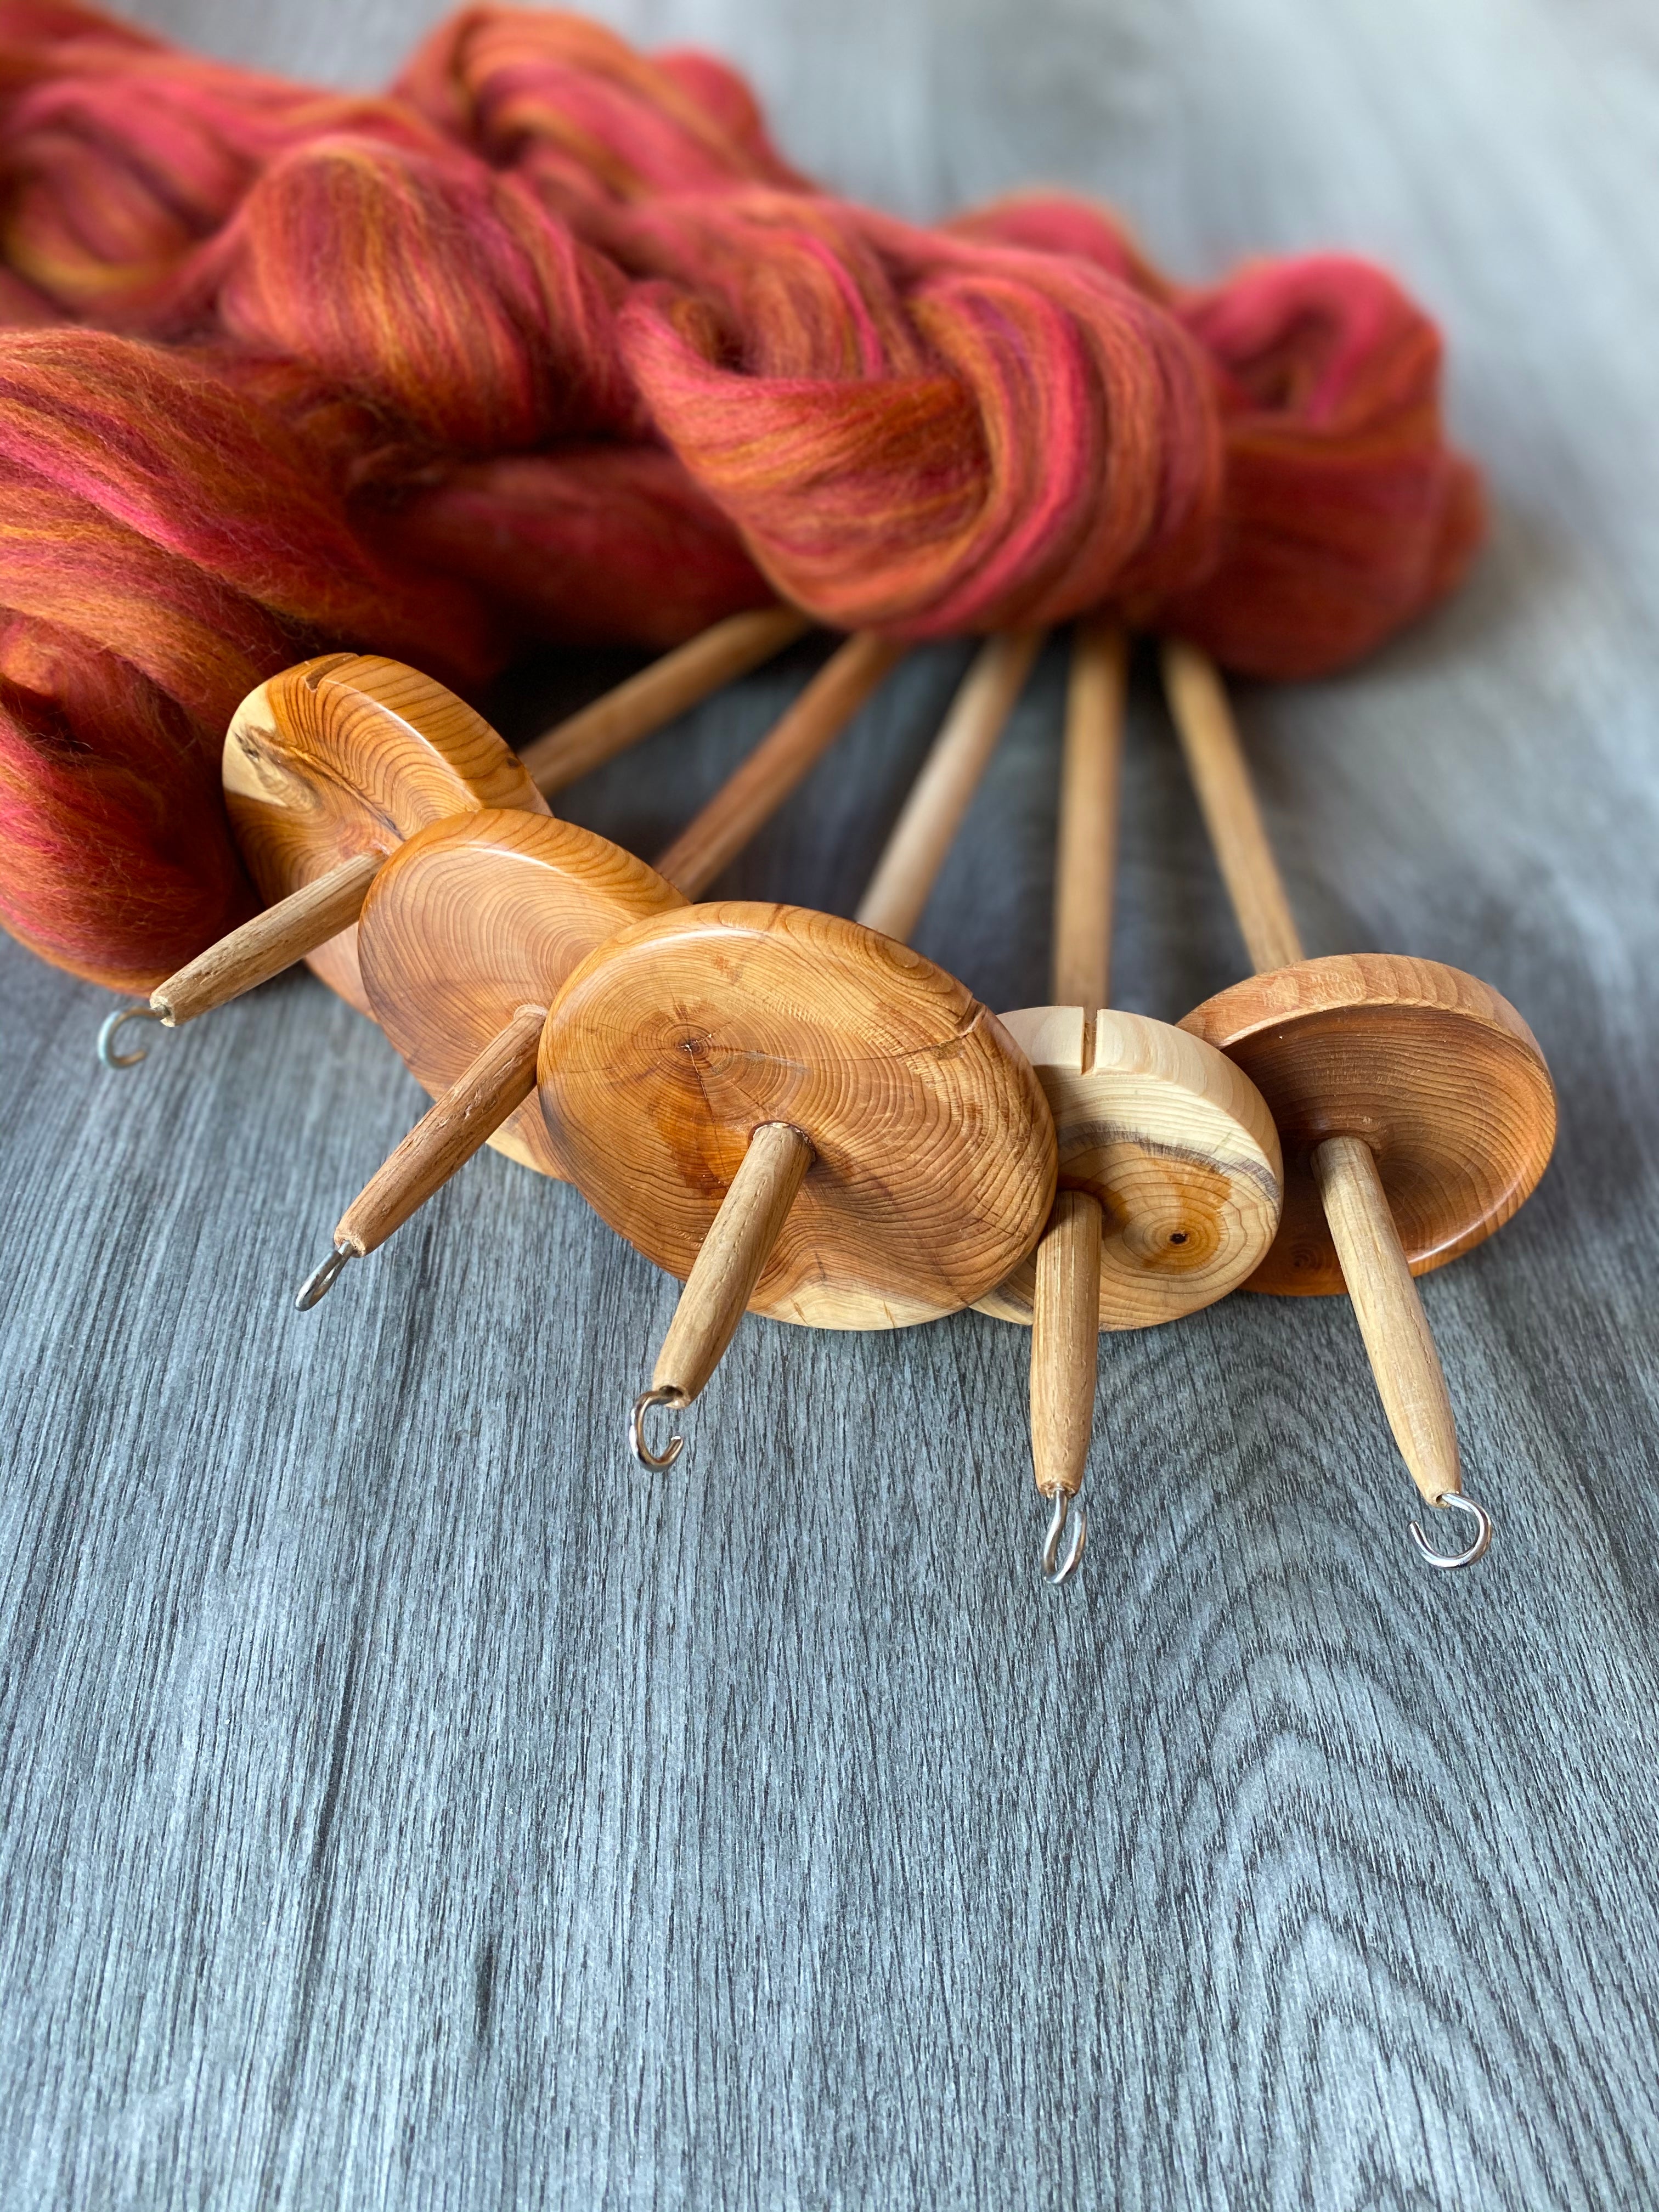 Learn to Spin on Drop Spindle Workshop